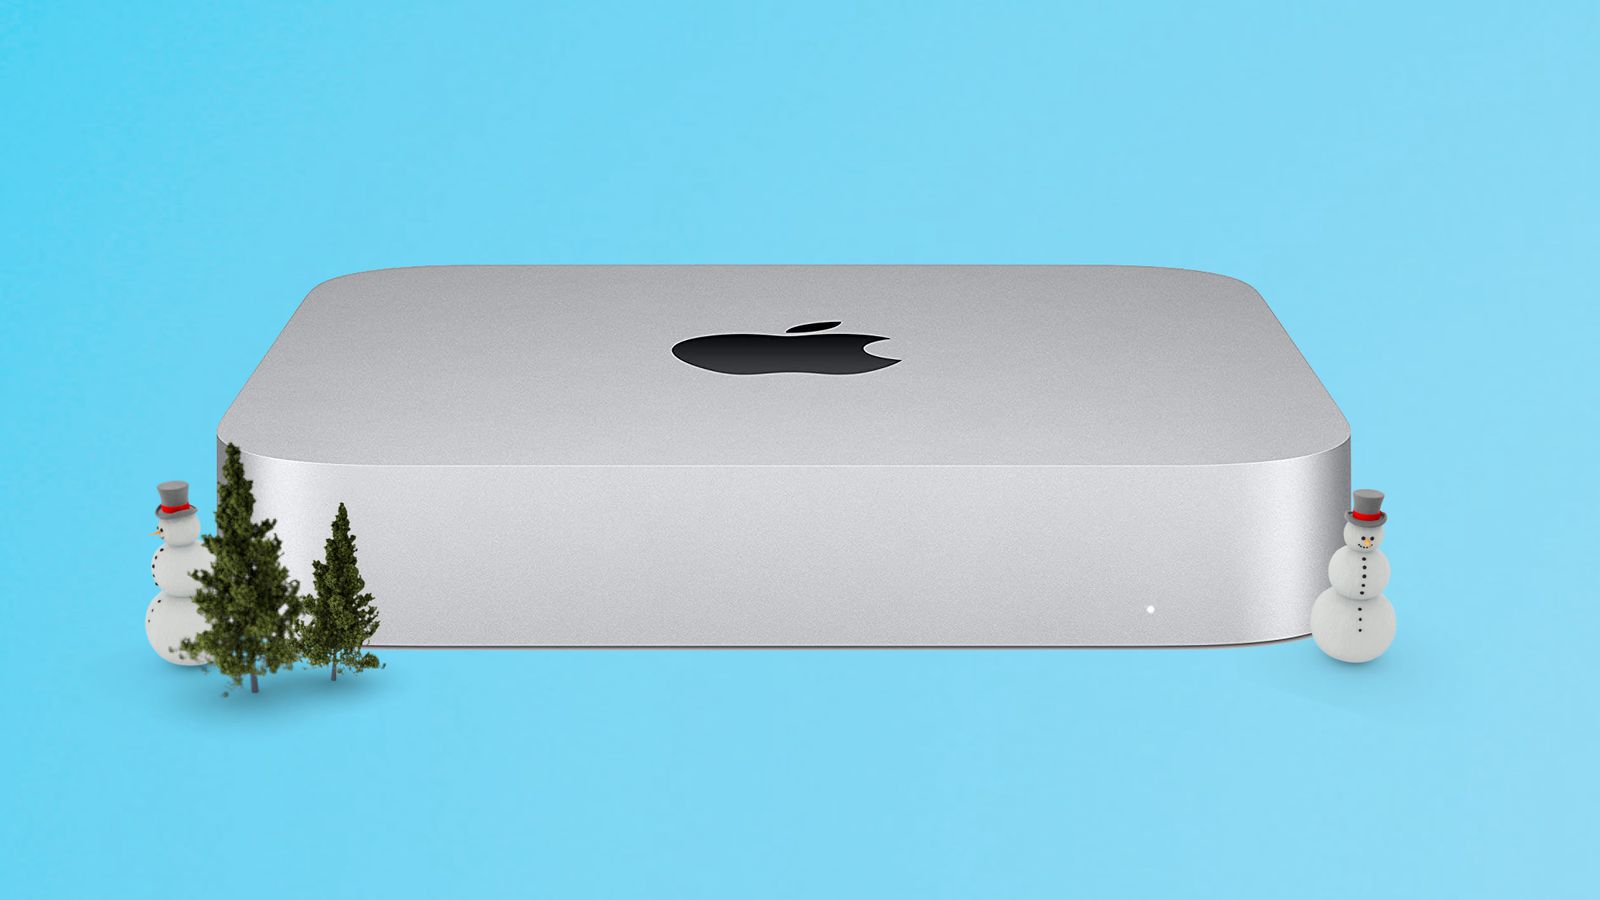 Deals: Save Up to $149 on Apple's 2020 M1 Mac Mini, Starting at 